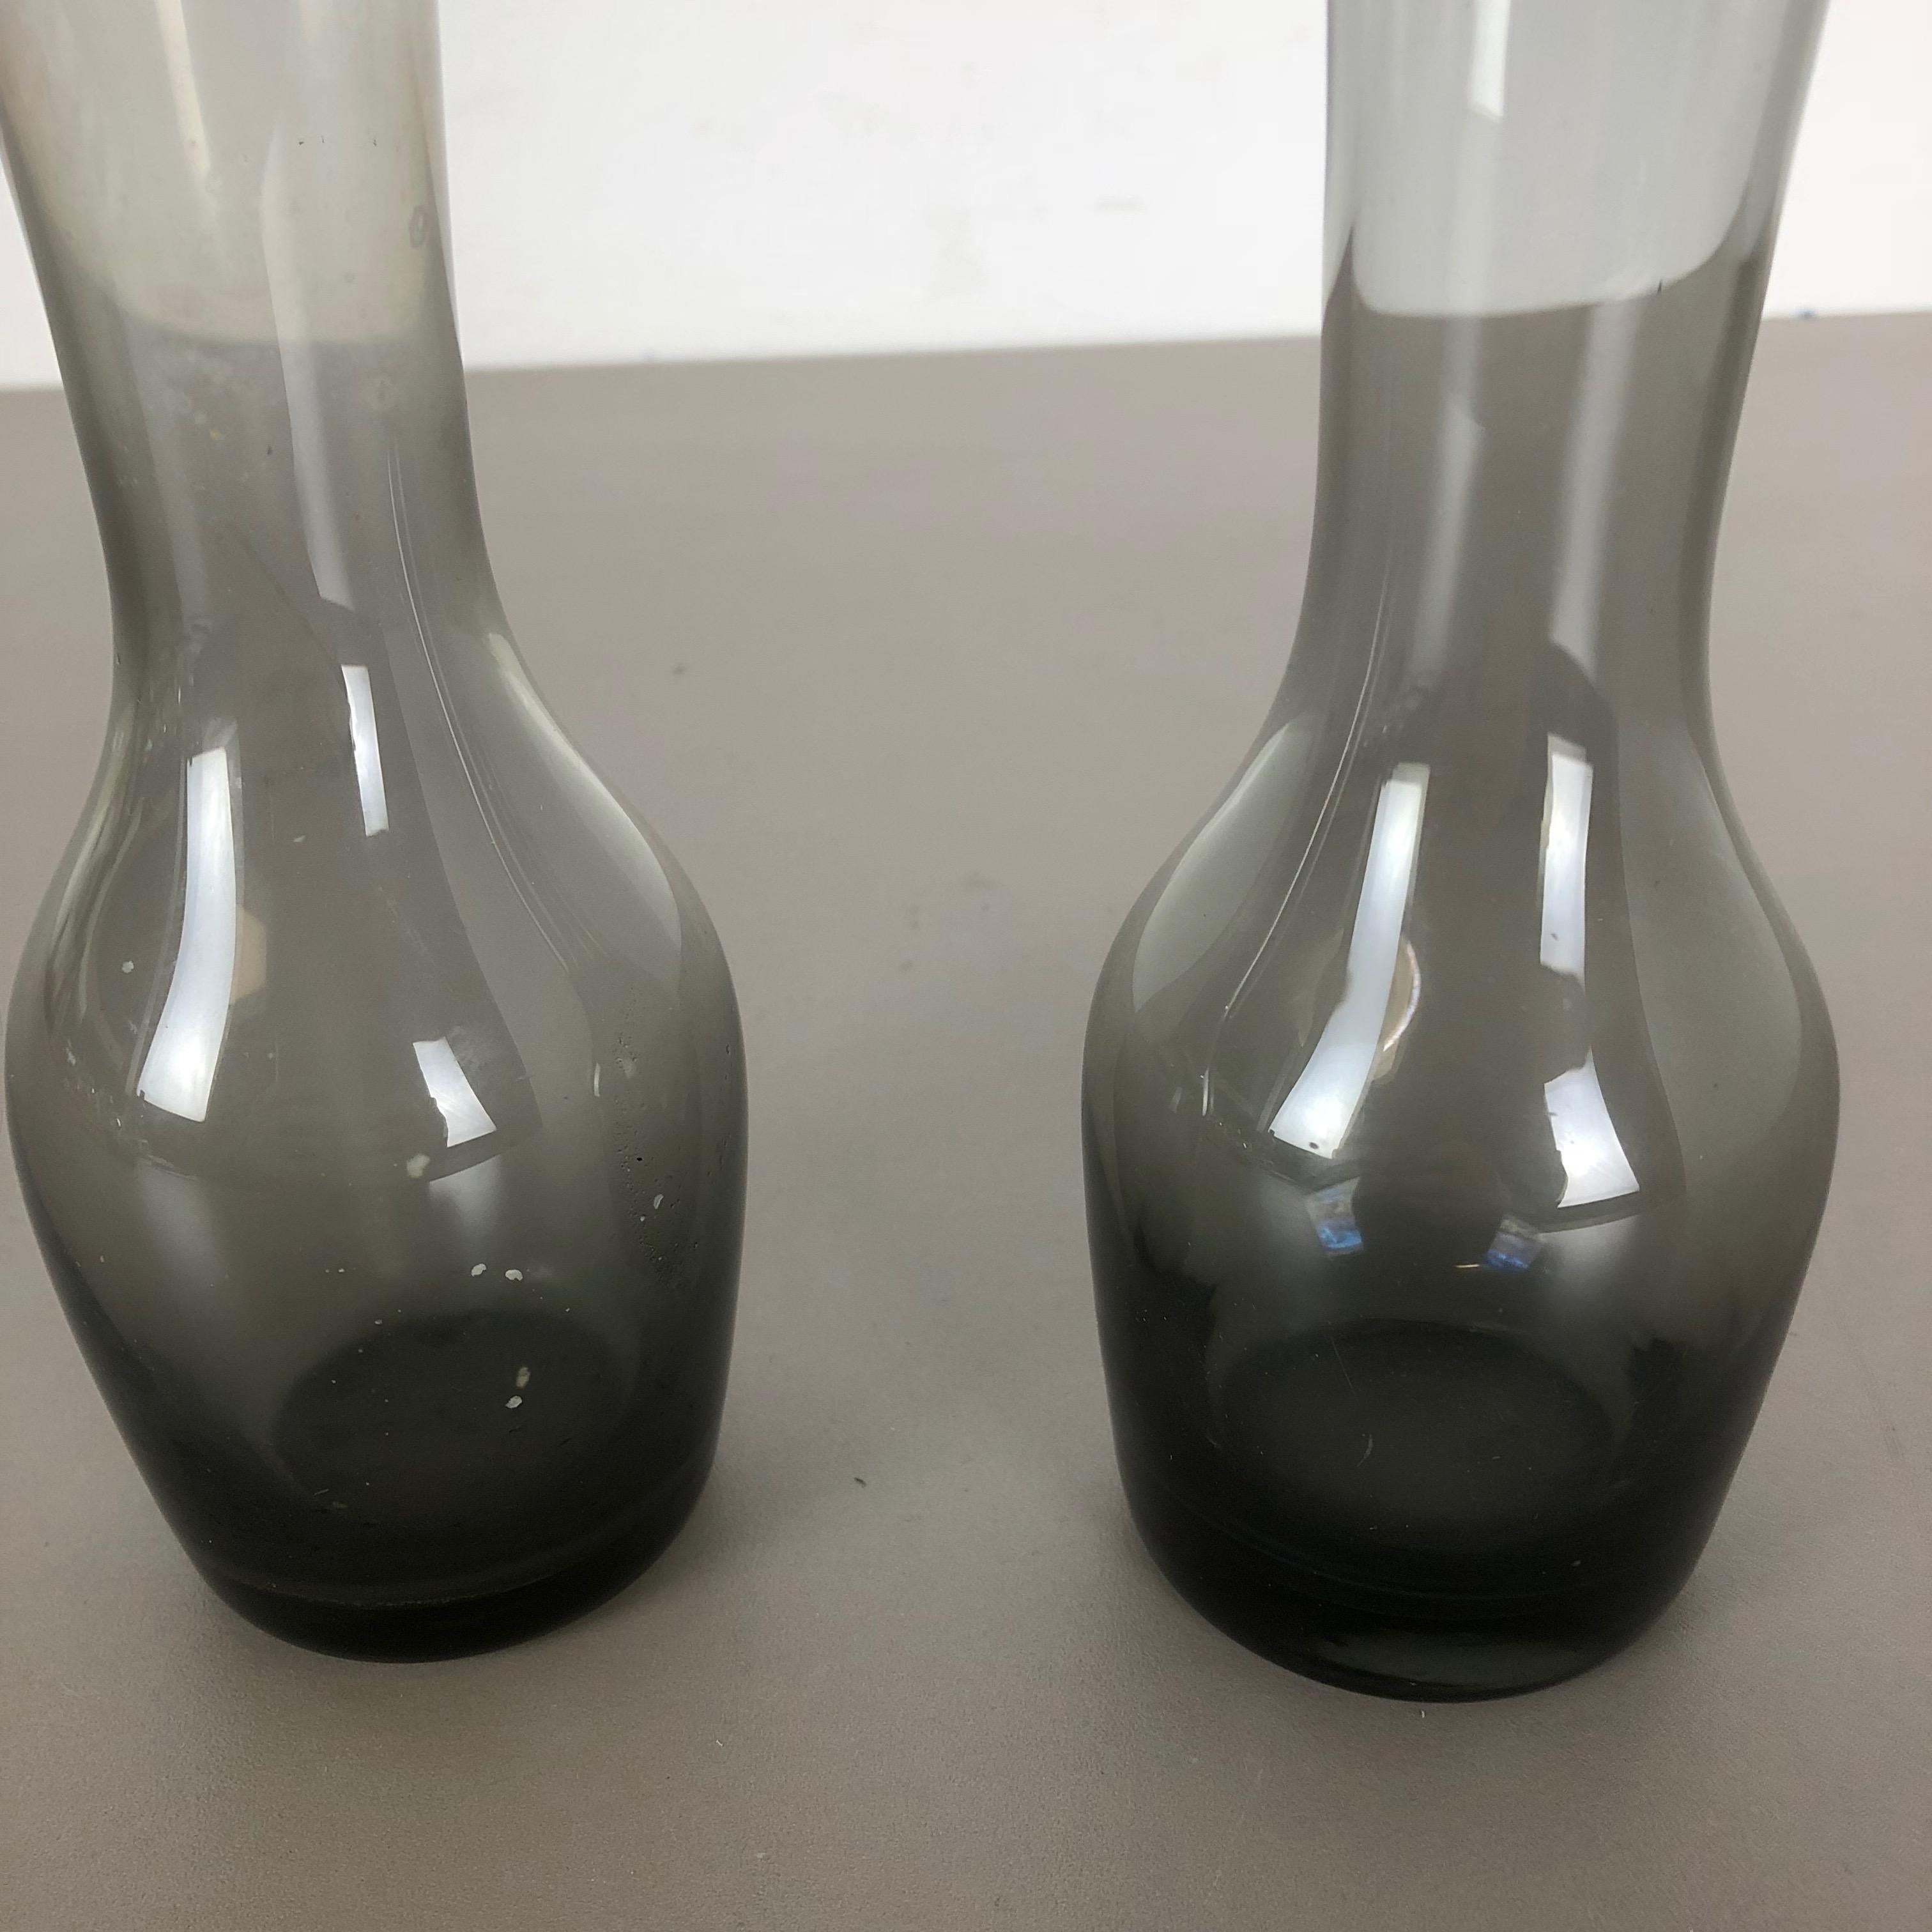 Vintage 1960s Set of 2 Turmalin Vases by Wilhelm Wagenfeld for WMF, Germany 2